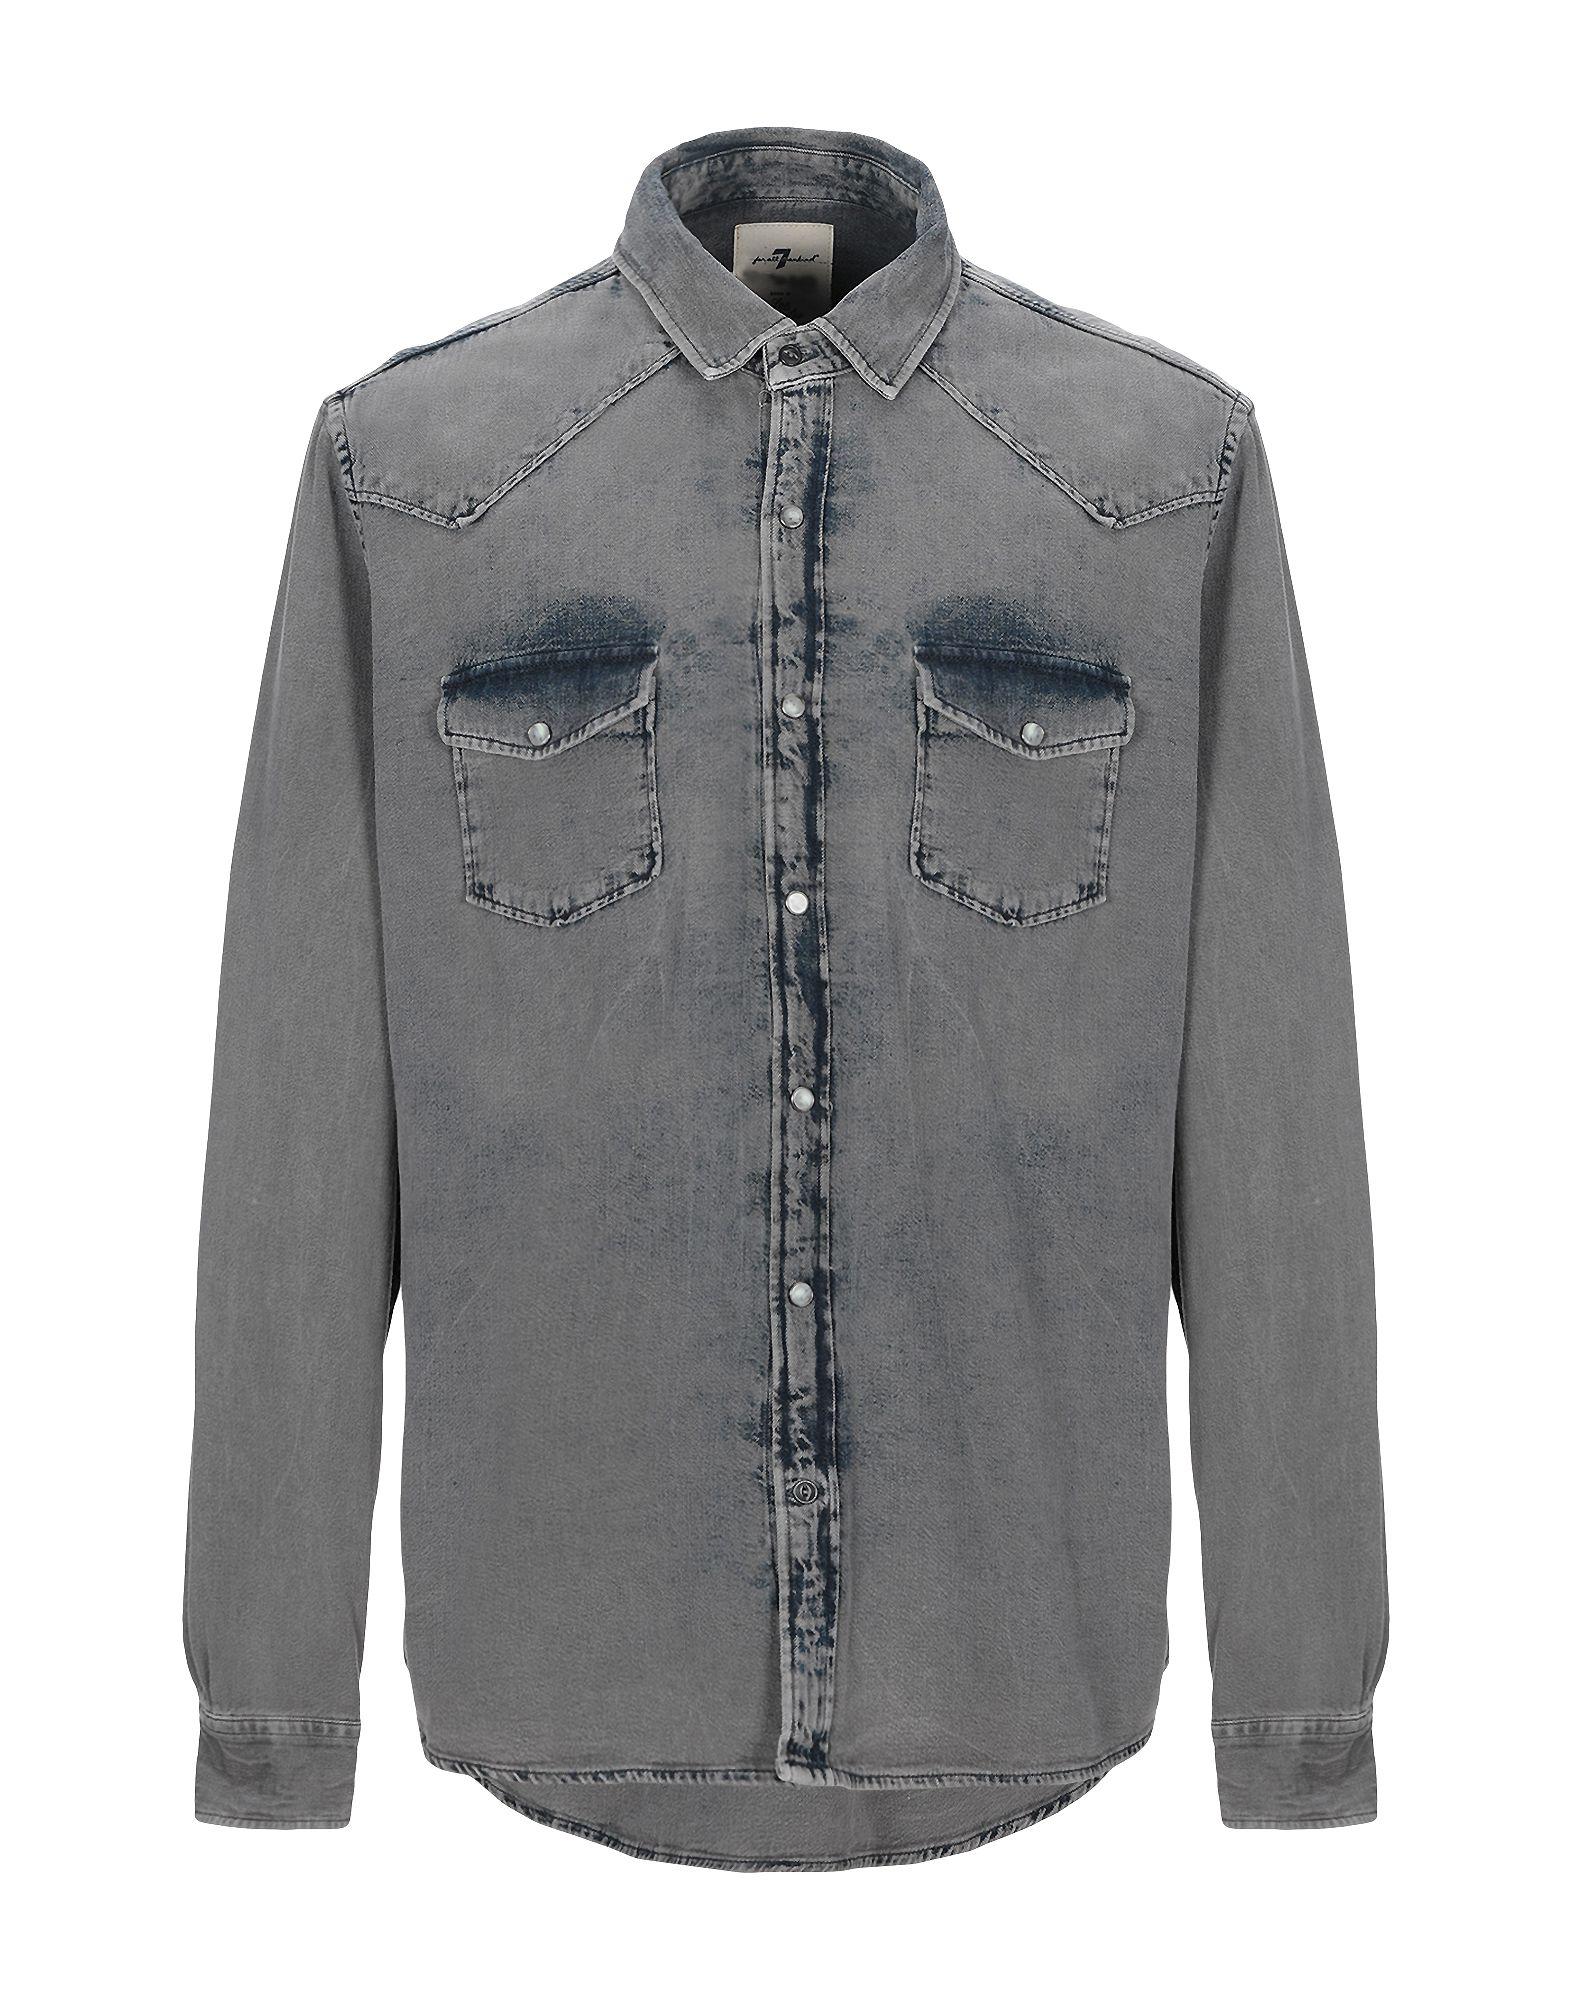 7 For All Mankind Denim Shirt in Grey (Gray) for Men - Lyst